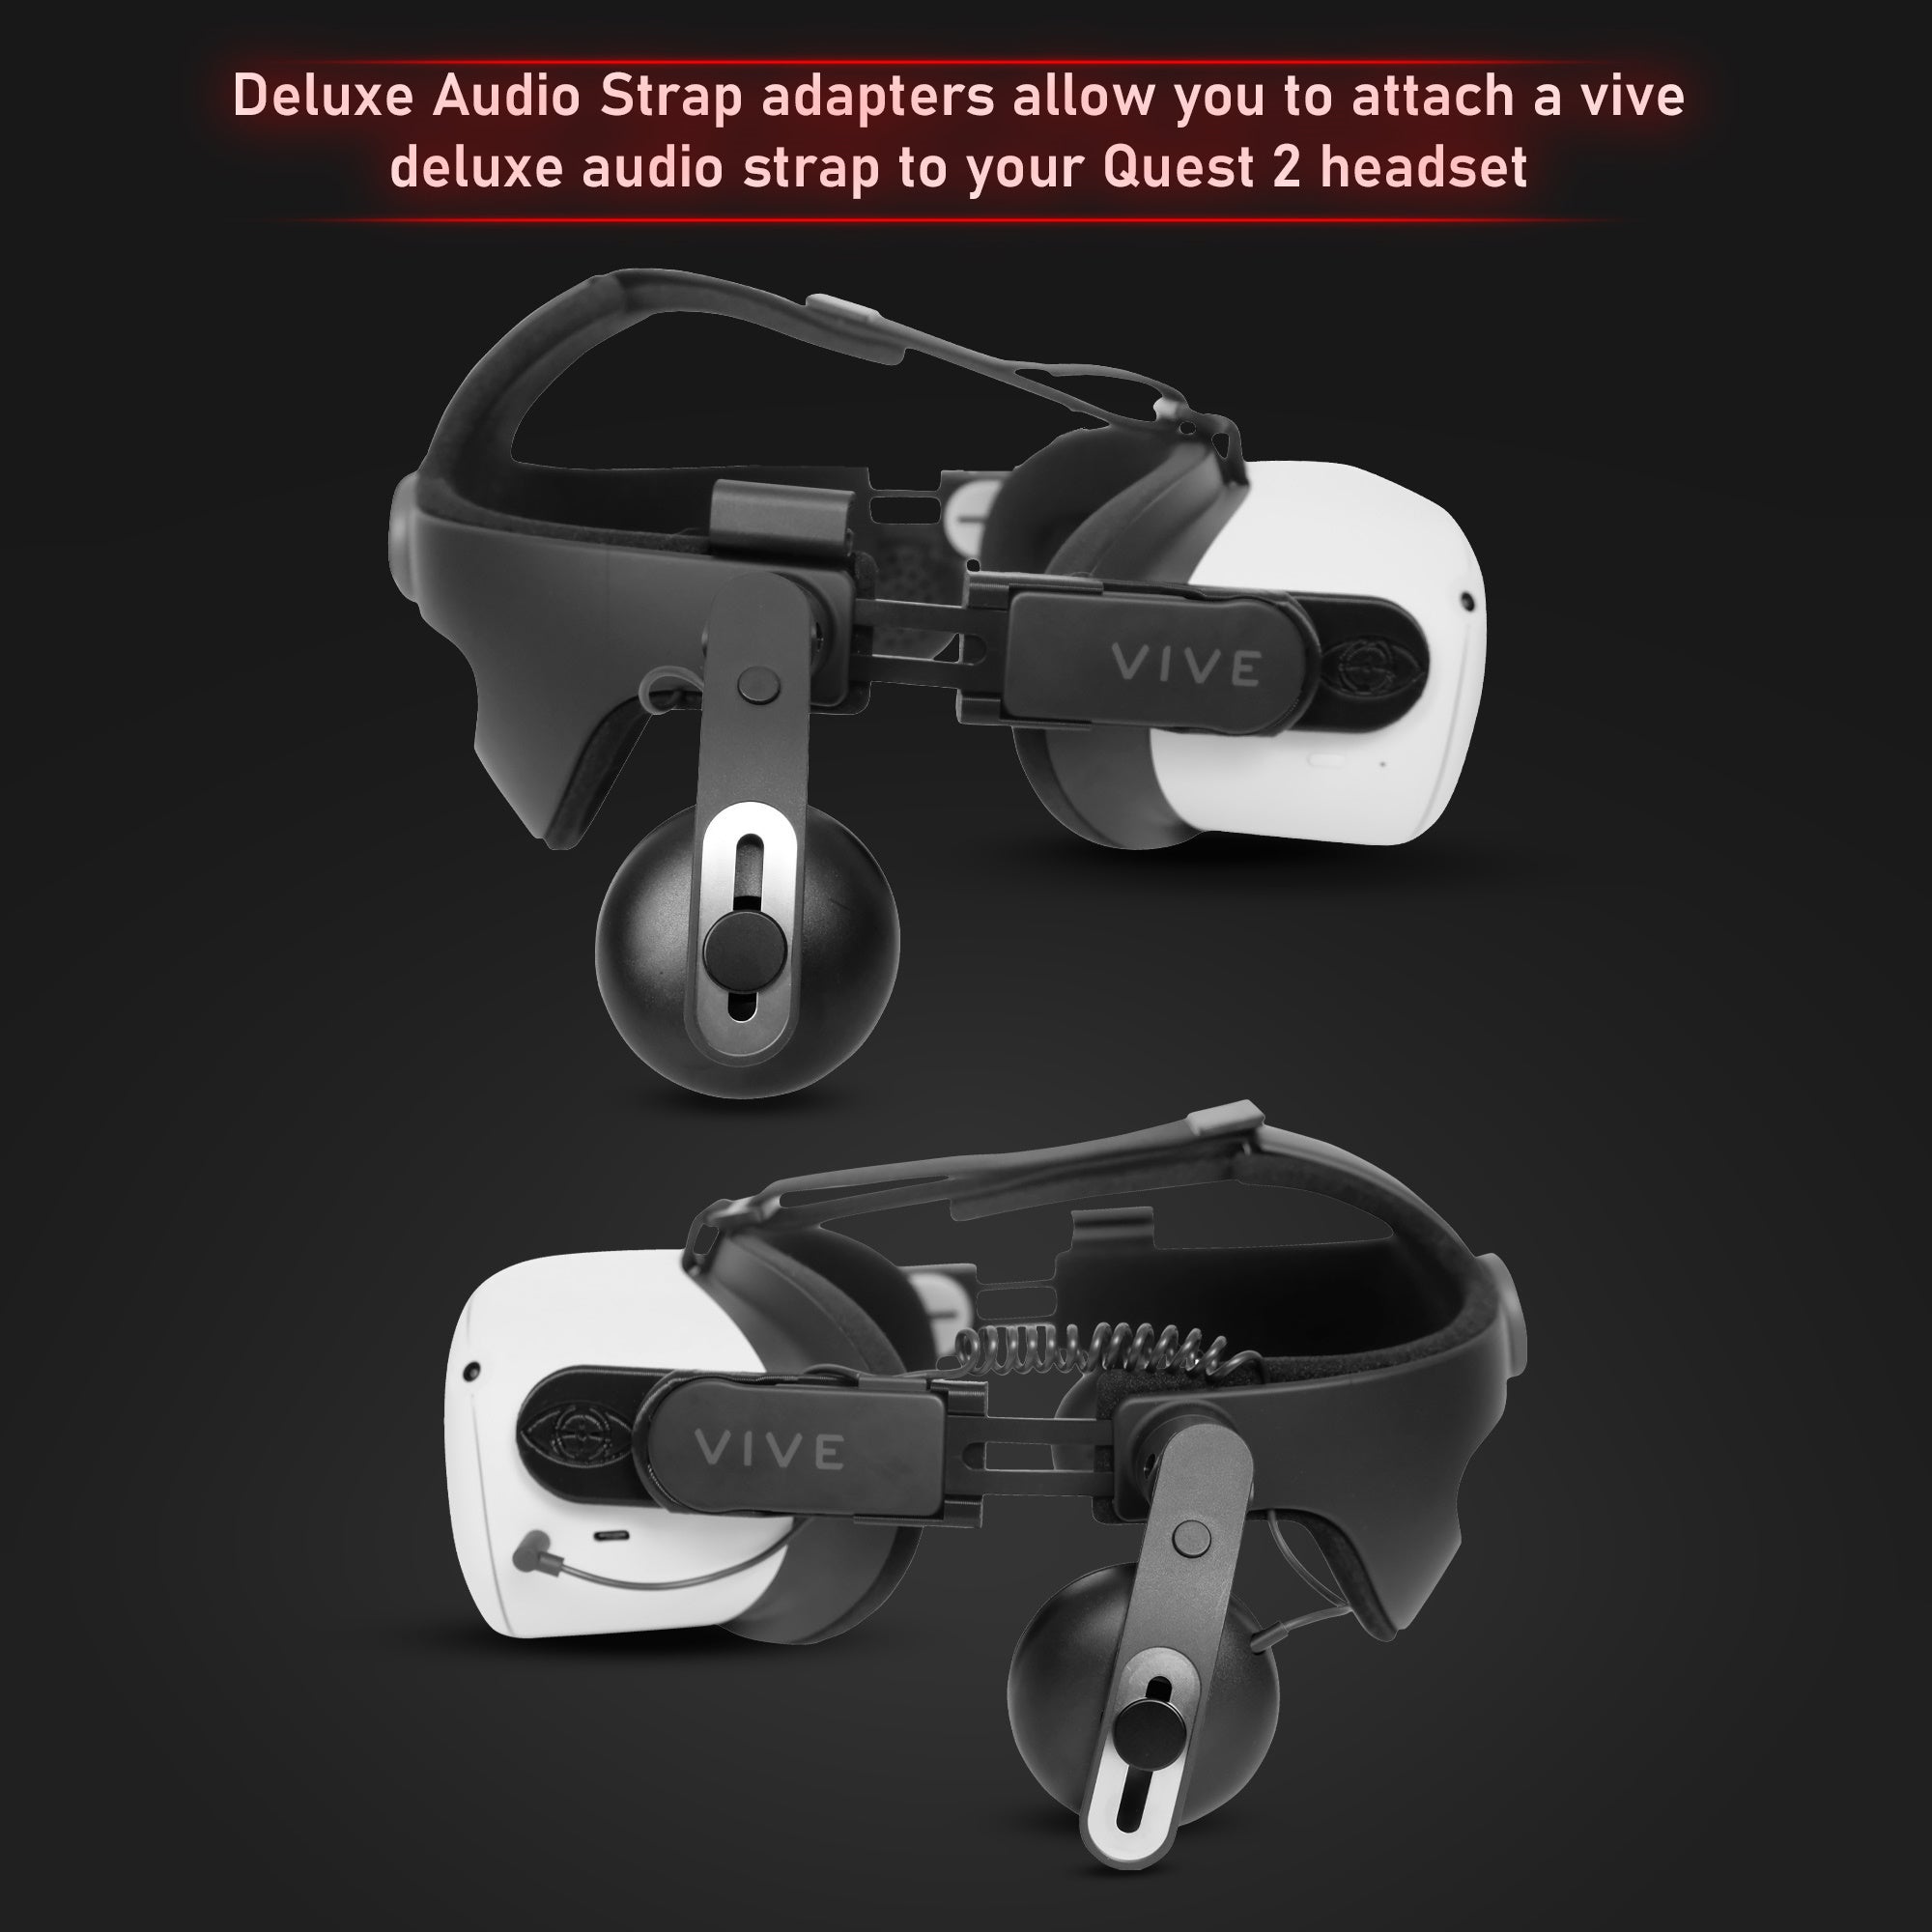 Deluxe Audio Strap adapters allow you to attach a vive delxue audio strap to your quest 2 headset